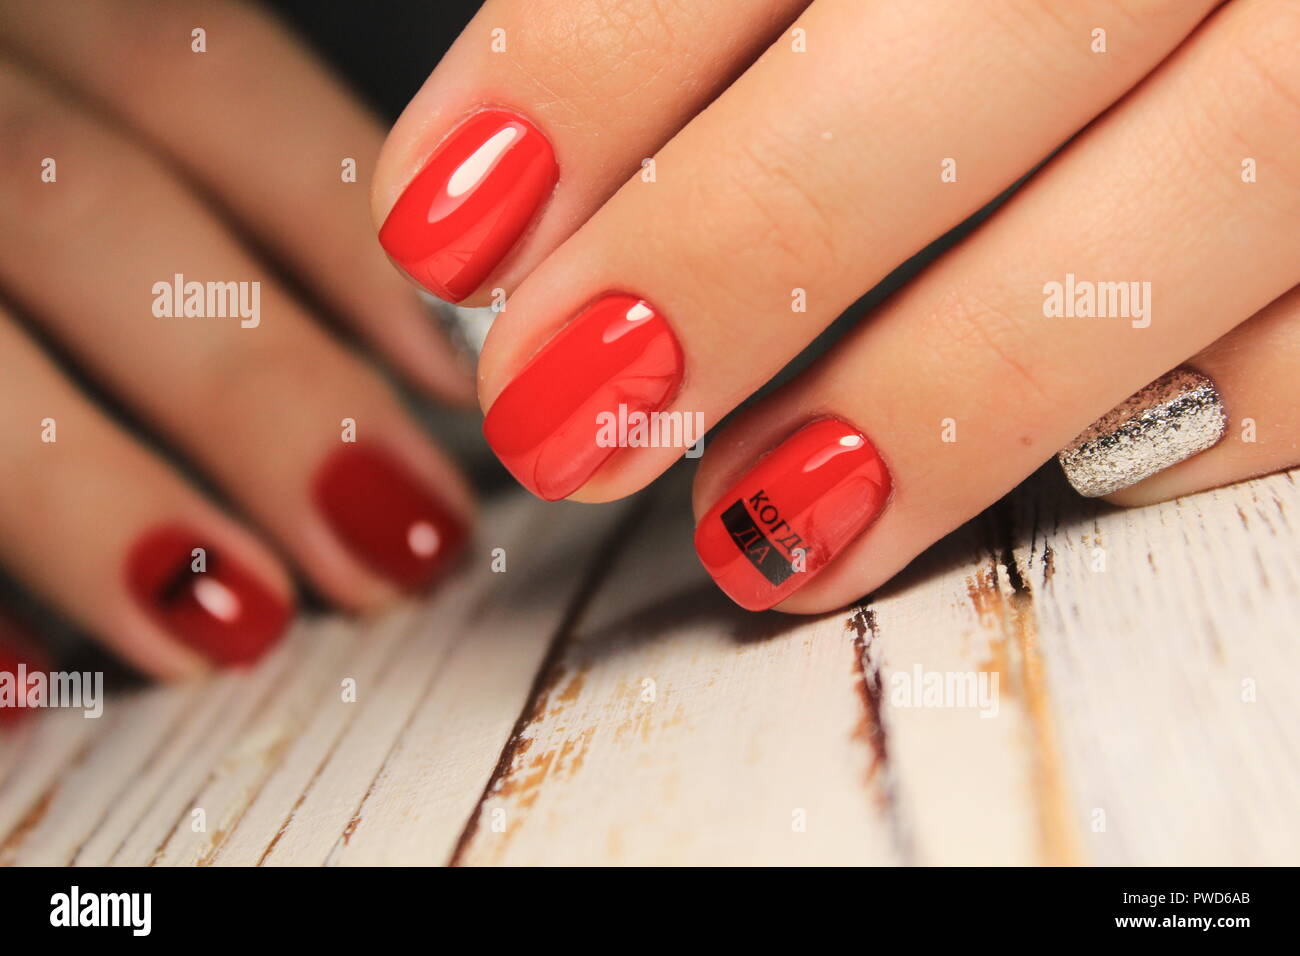 Perfect manicure and natural nails. Attractive modern nail art design. Gel  polish applied Stock Photo - Alamy